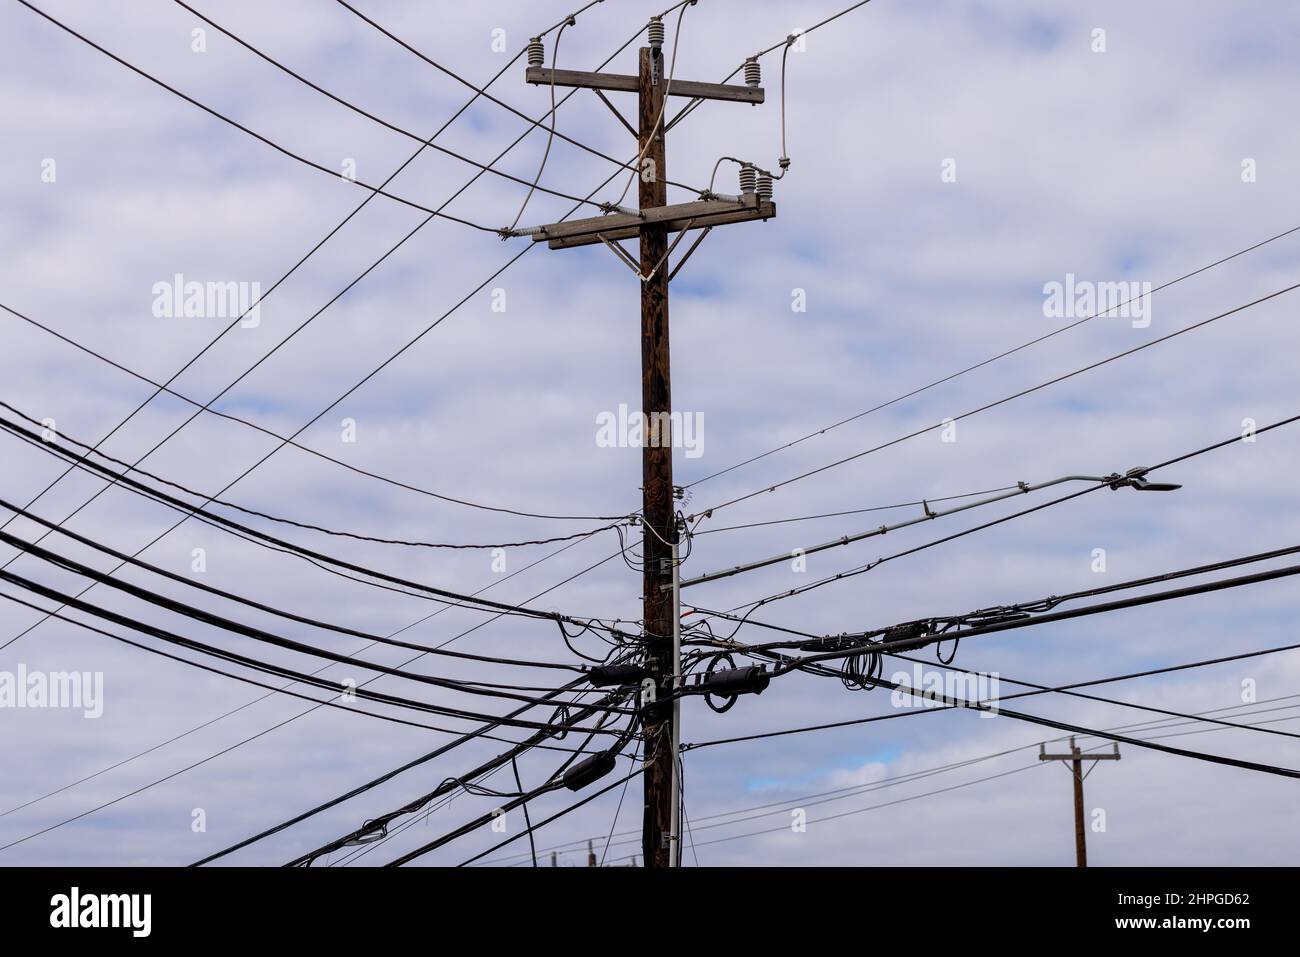 Electricity pole with many electrical cables. Complex power grid wooden poles connecting and distributing electricity and TV signals Stock Photo